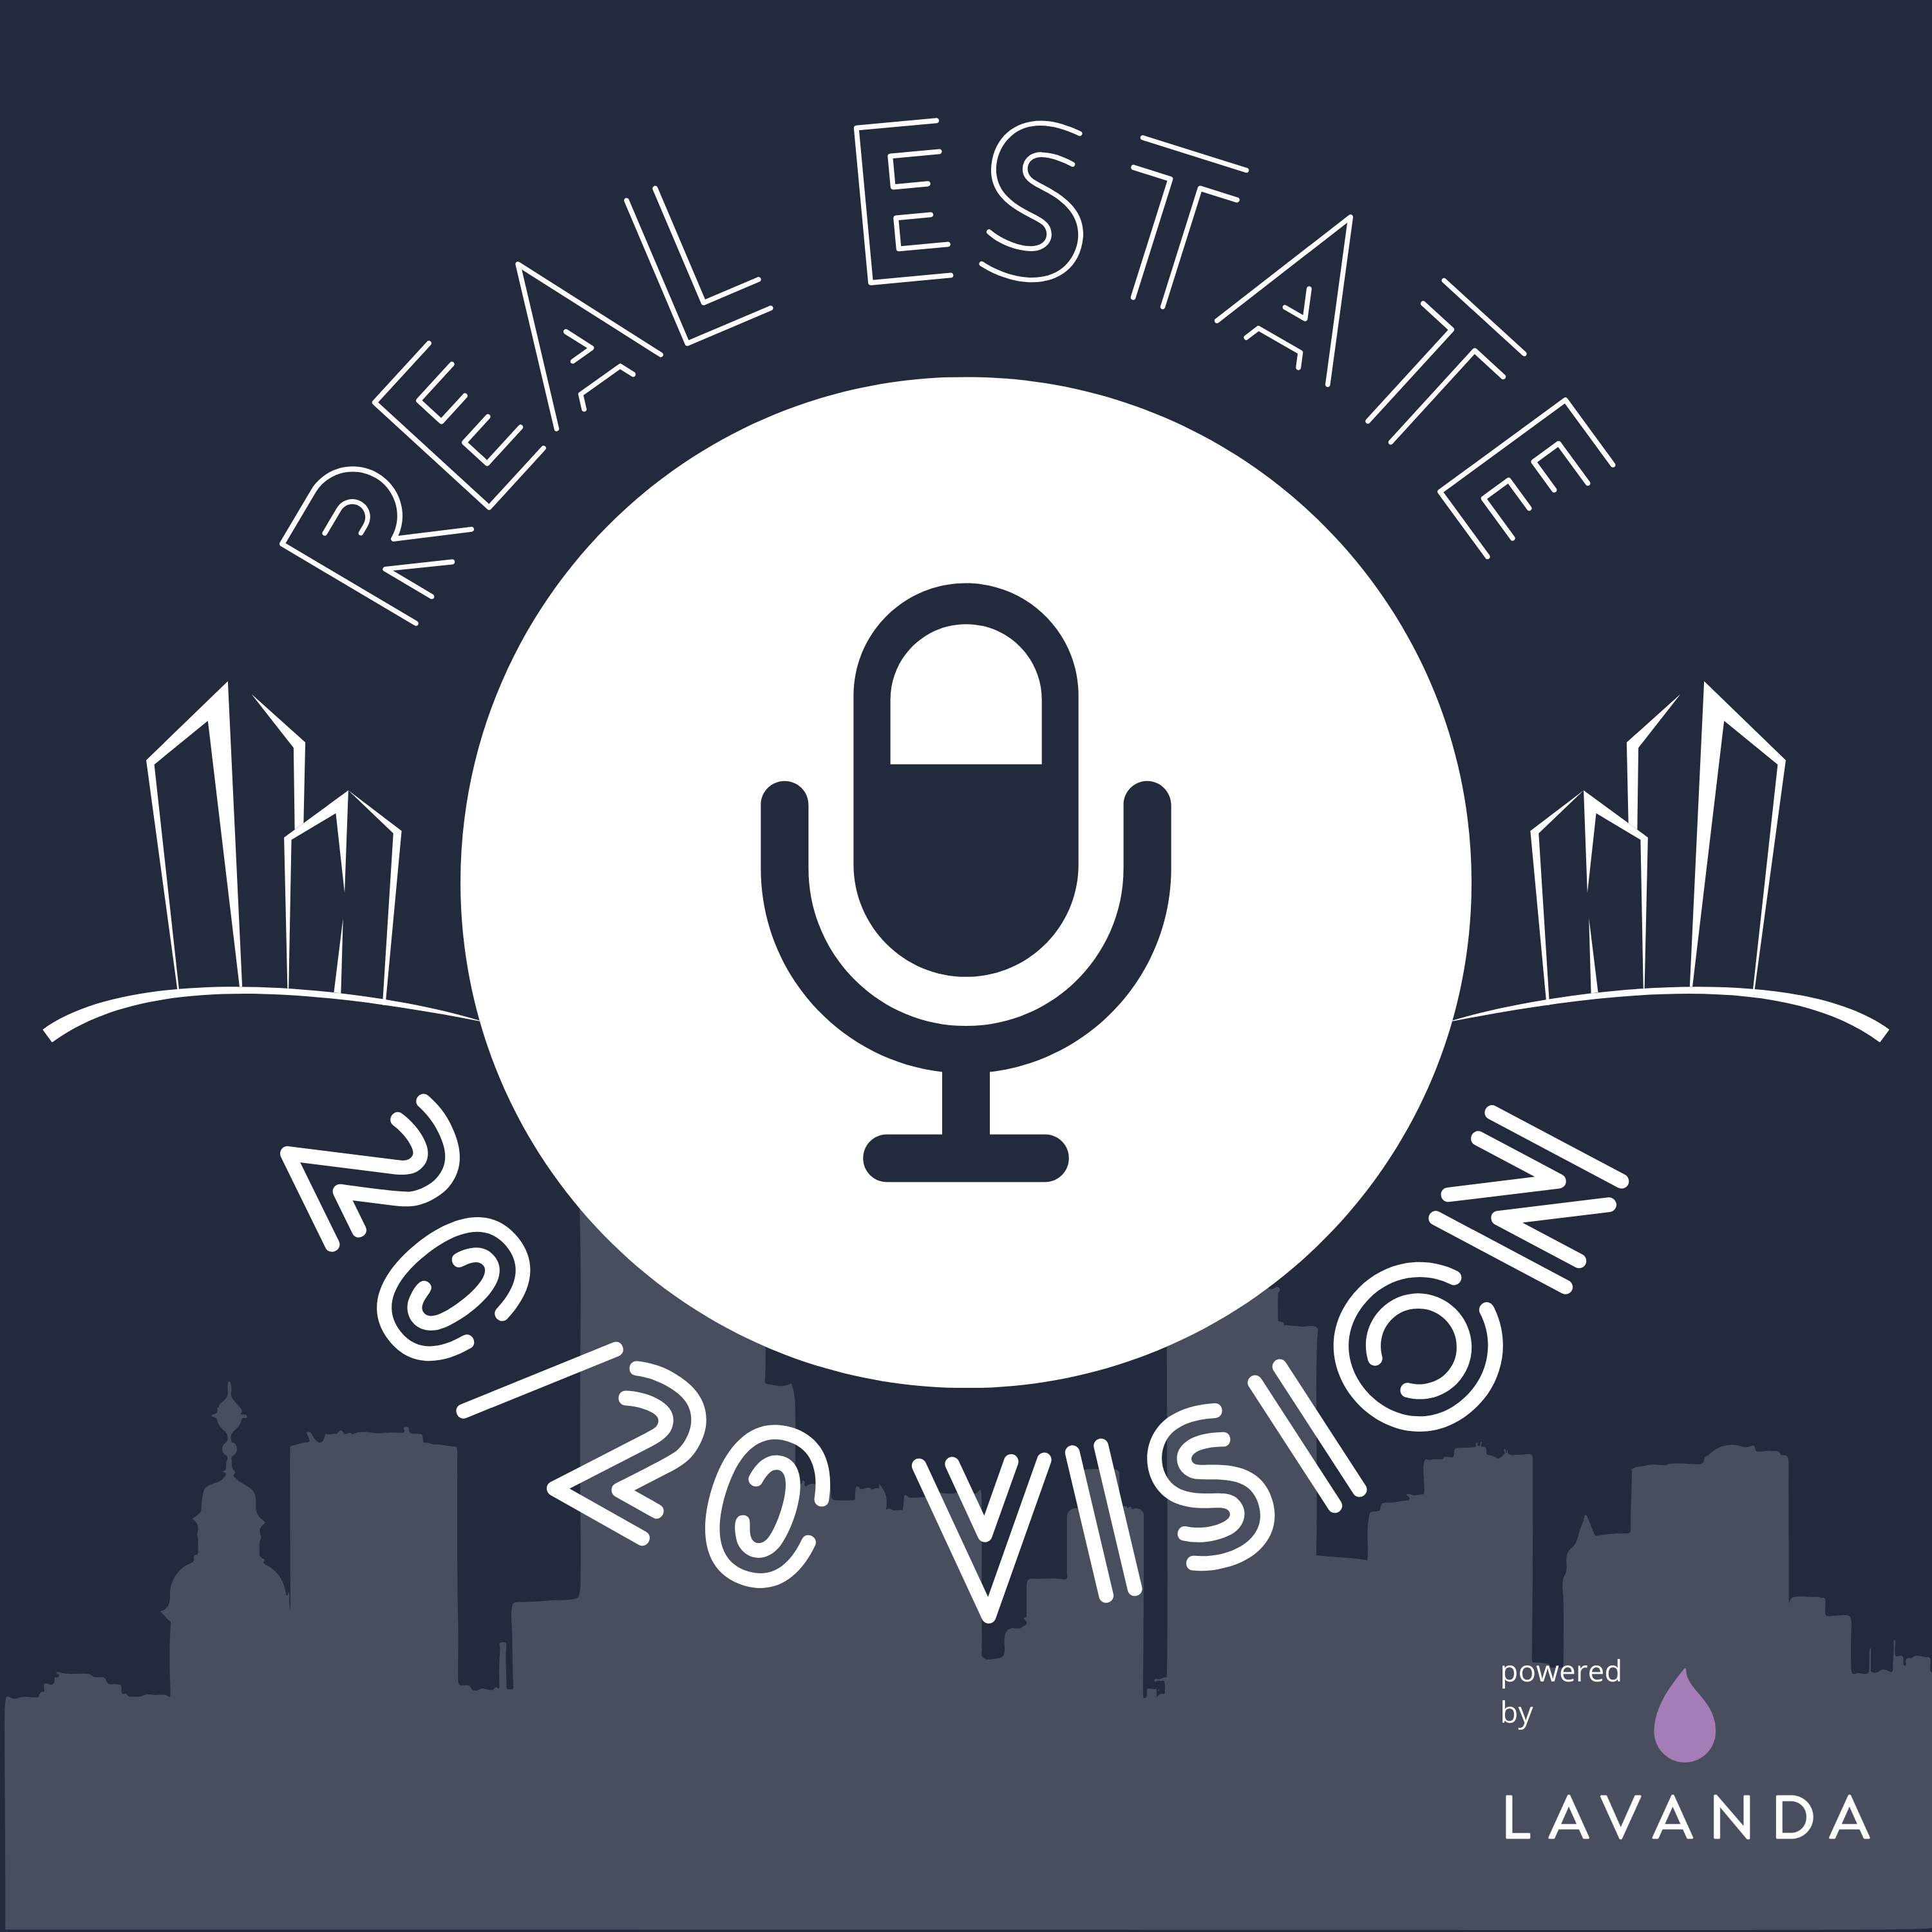 20/20 Vision: the future of residential real estate